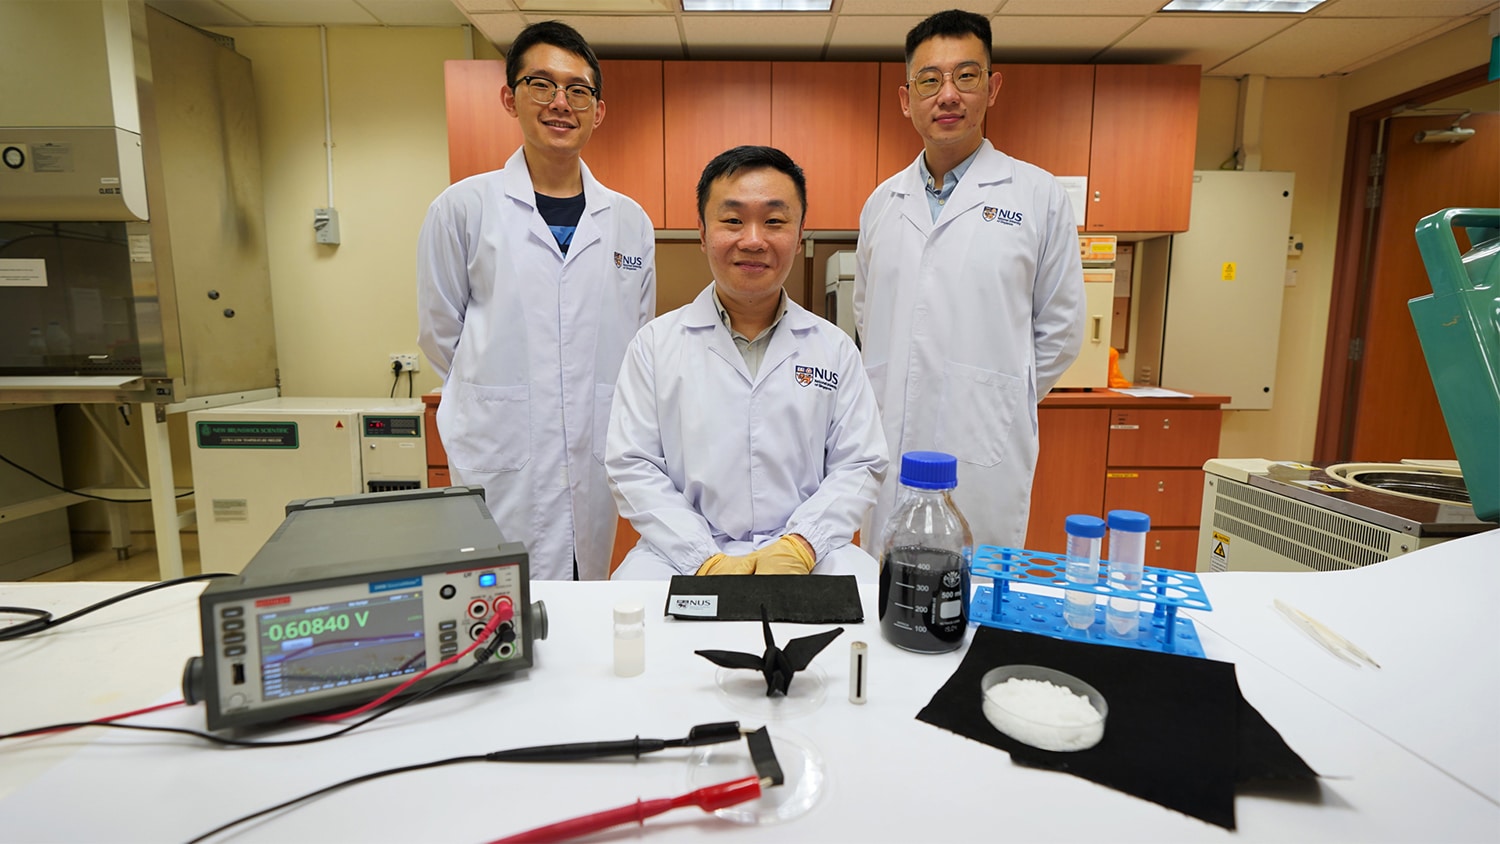 Asst Prof Tan Swee Ching (centre), together with Dr Zhang Yaoxin (left) and Mr Qu Hao (right), developed a self-charging fabric that generates electricity from air moisture.